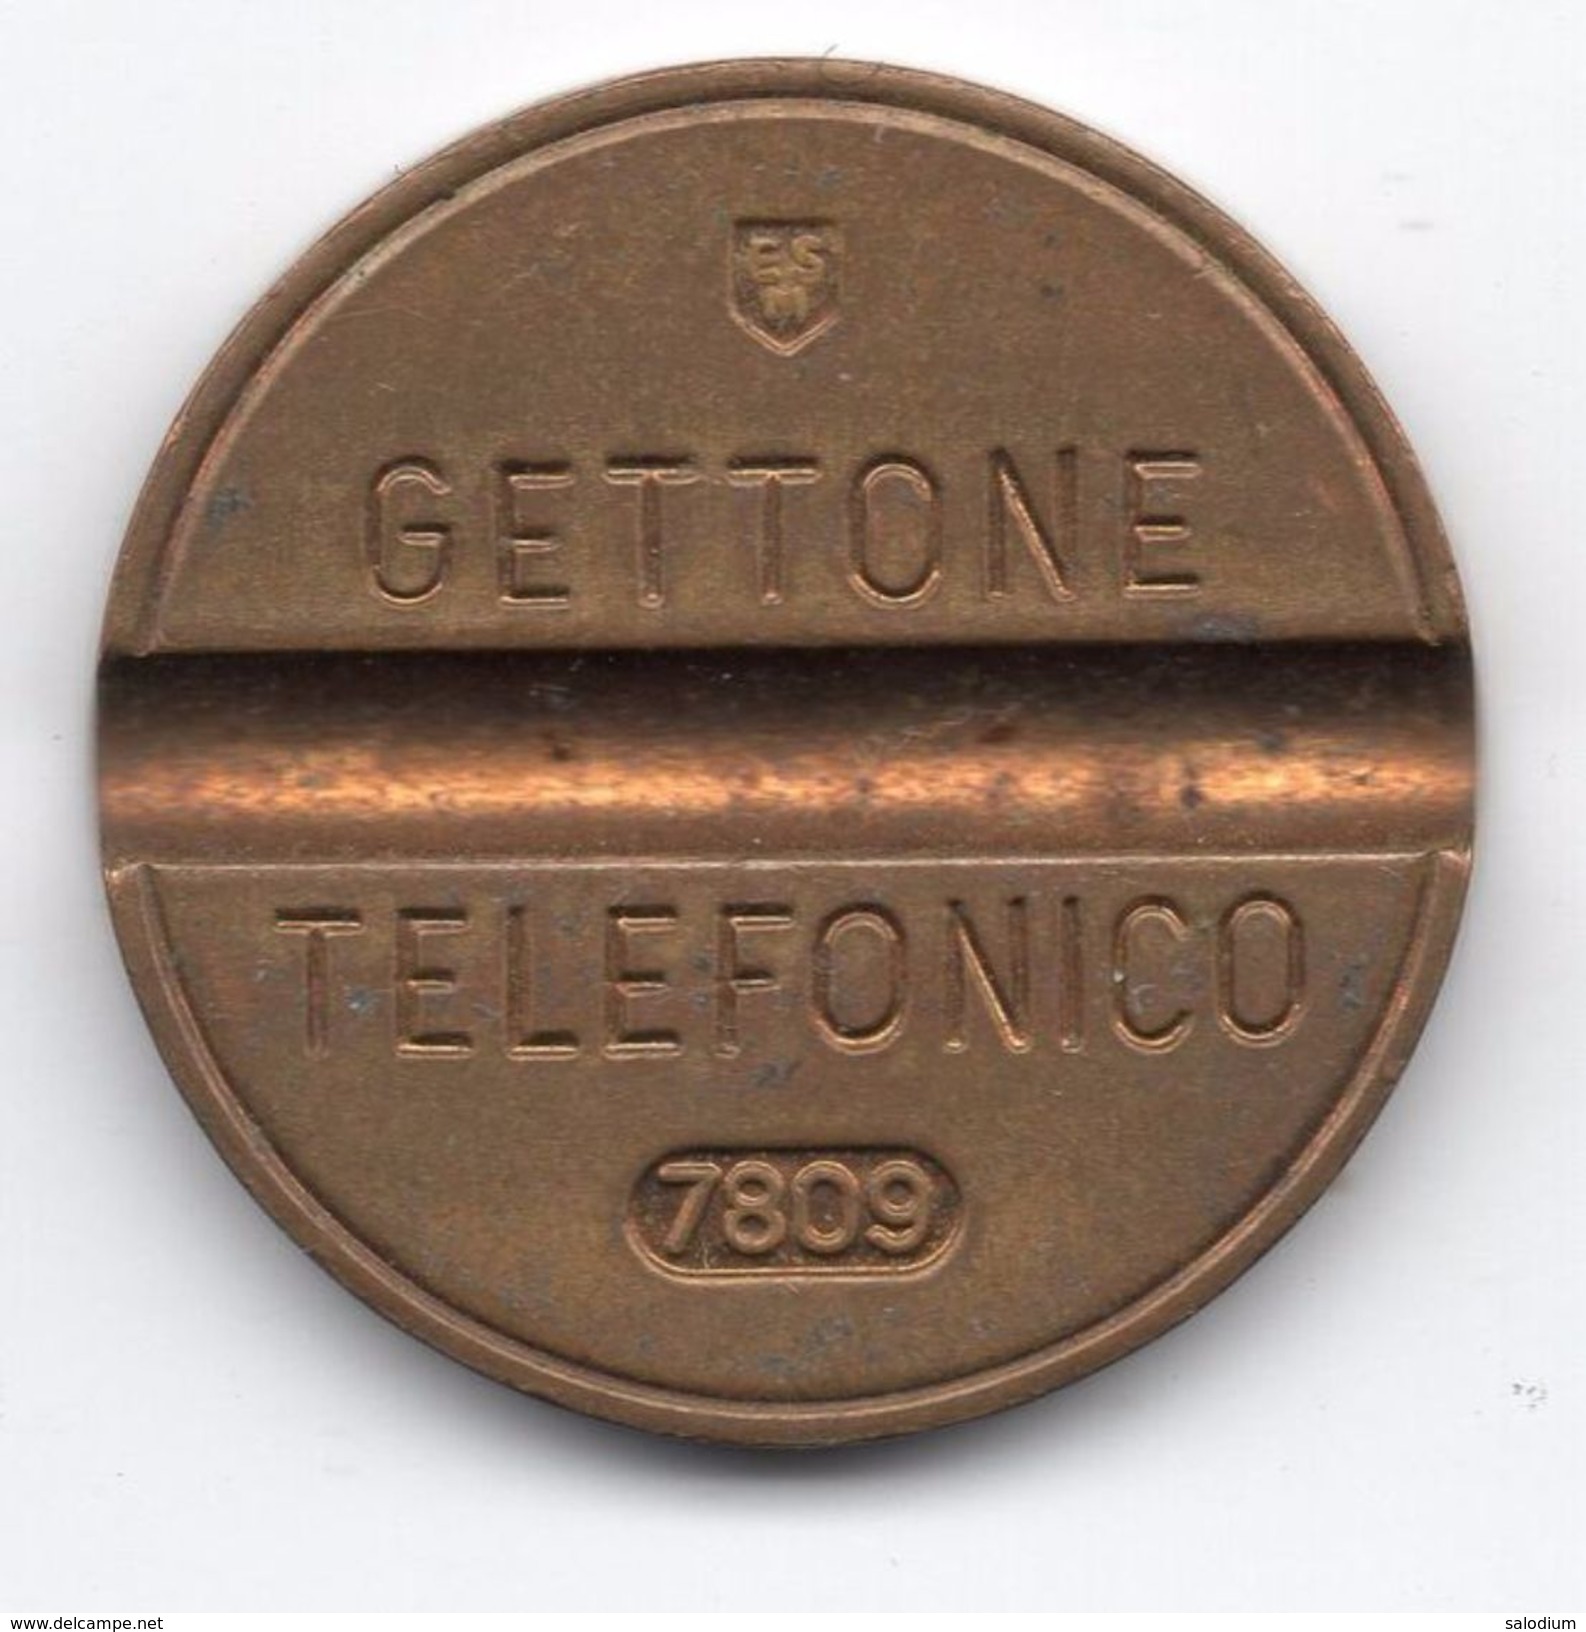 Gettone Telefonico 7809 Token Telephone - (Id-661) - Professionals/Firms